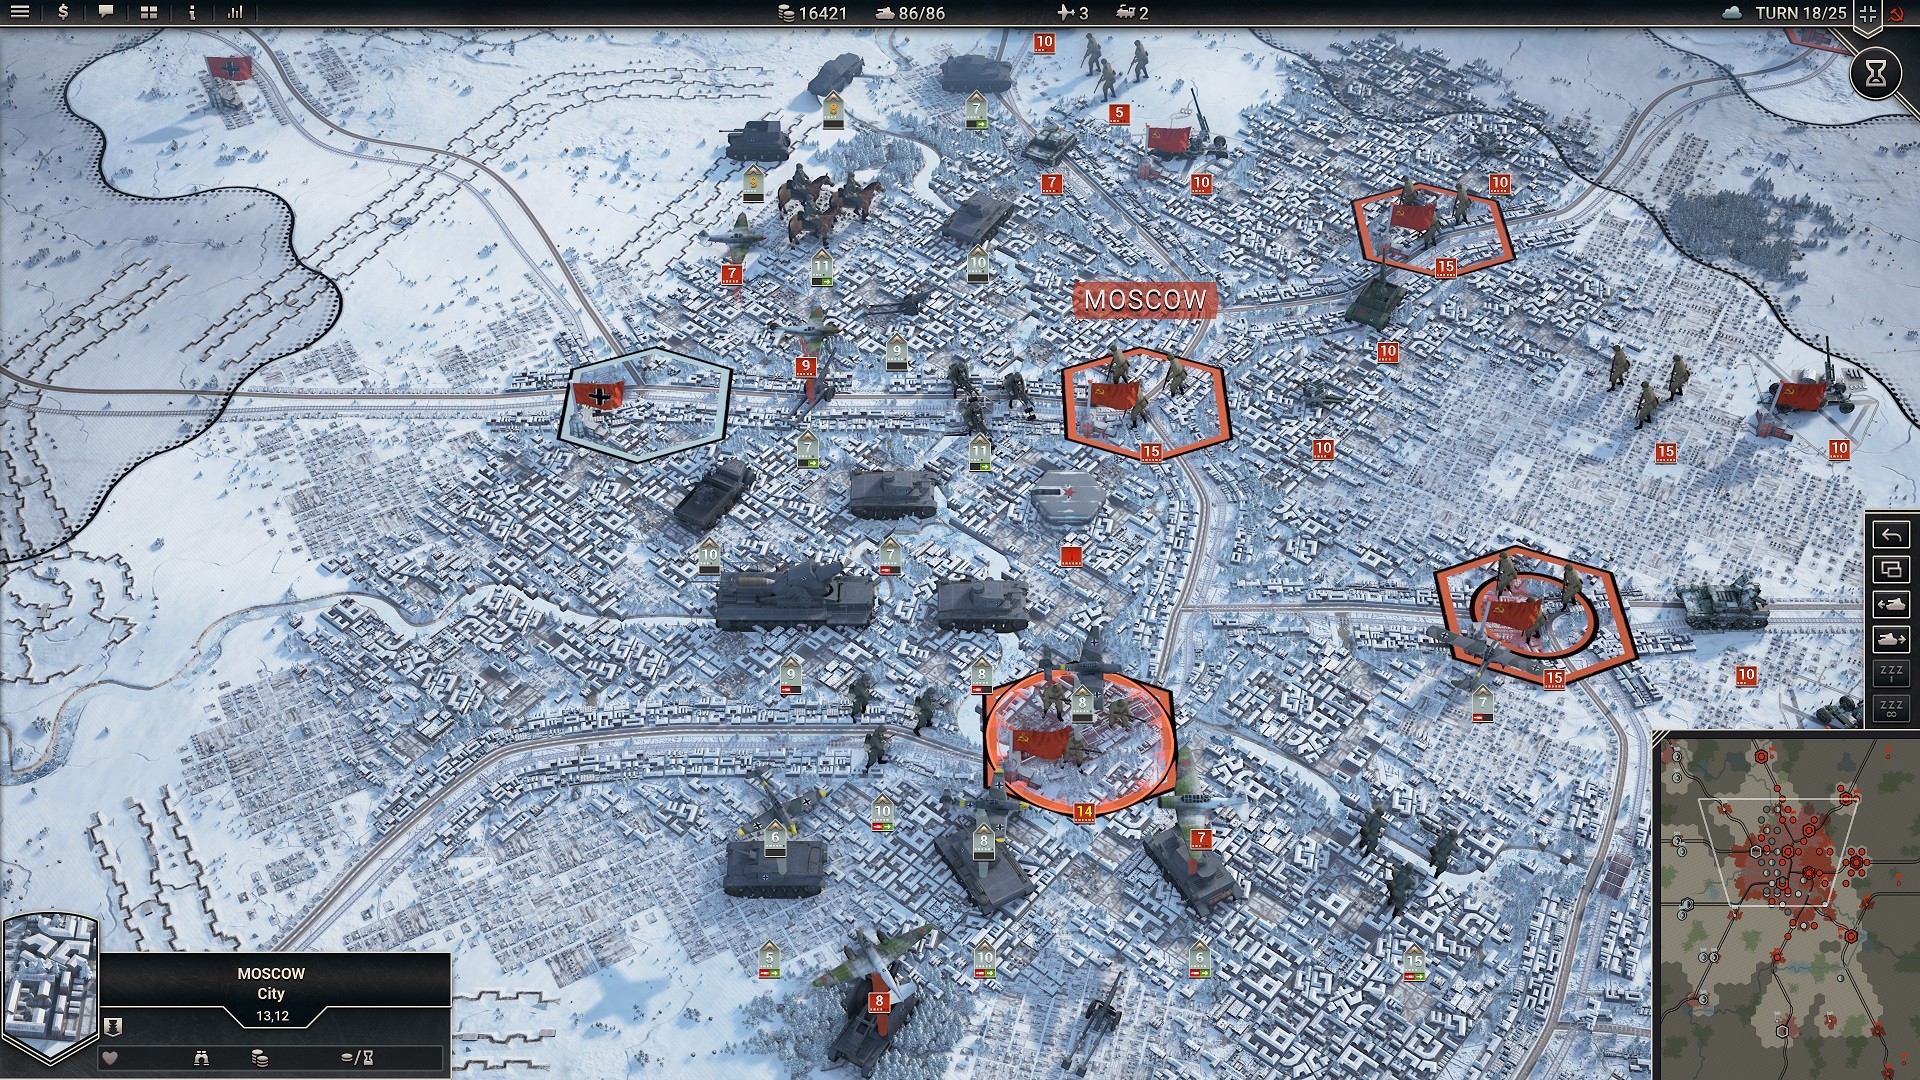 Best tank games: Panzer Corps 2. Image shows Tanks approaching a snowy Moscow.